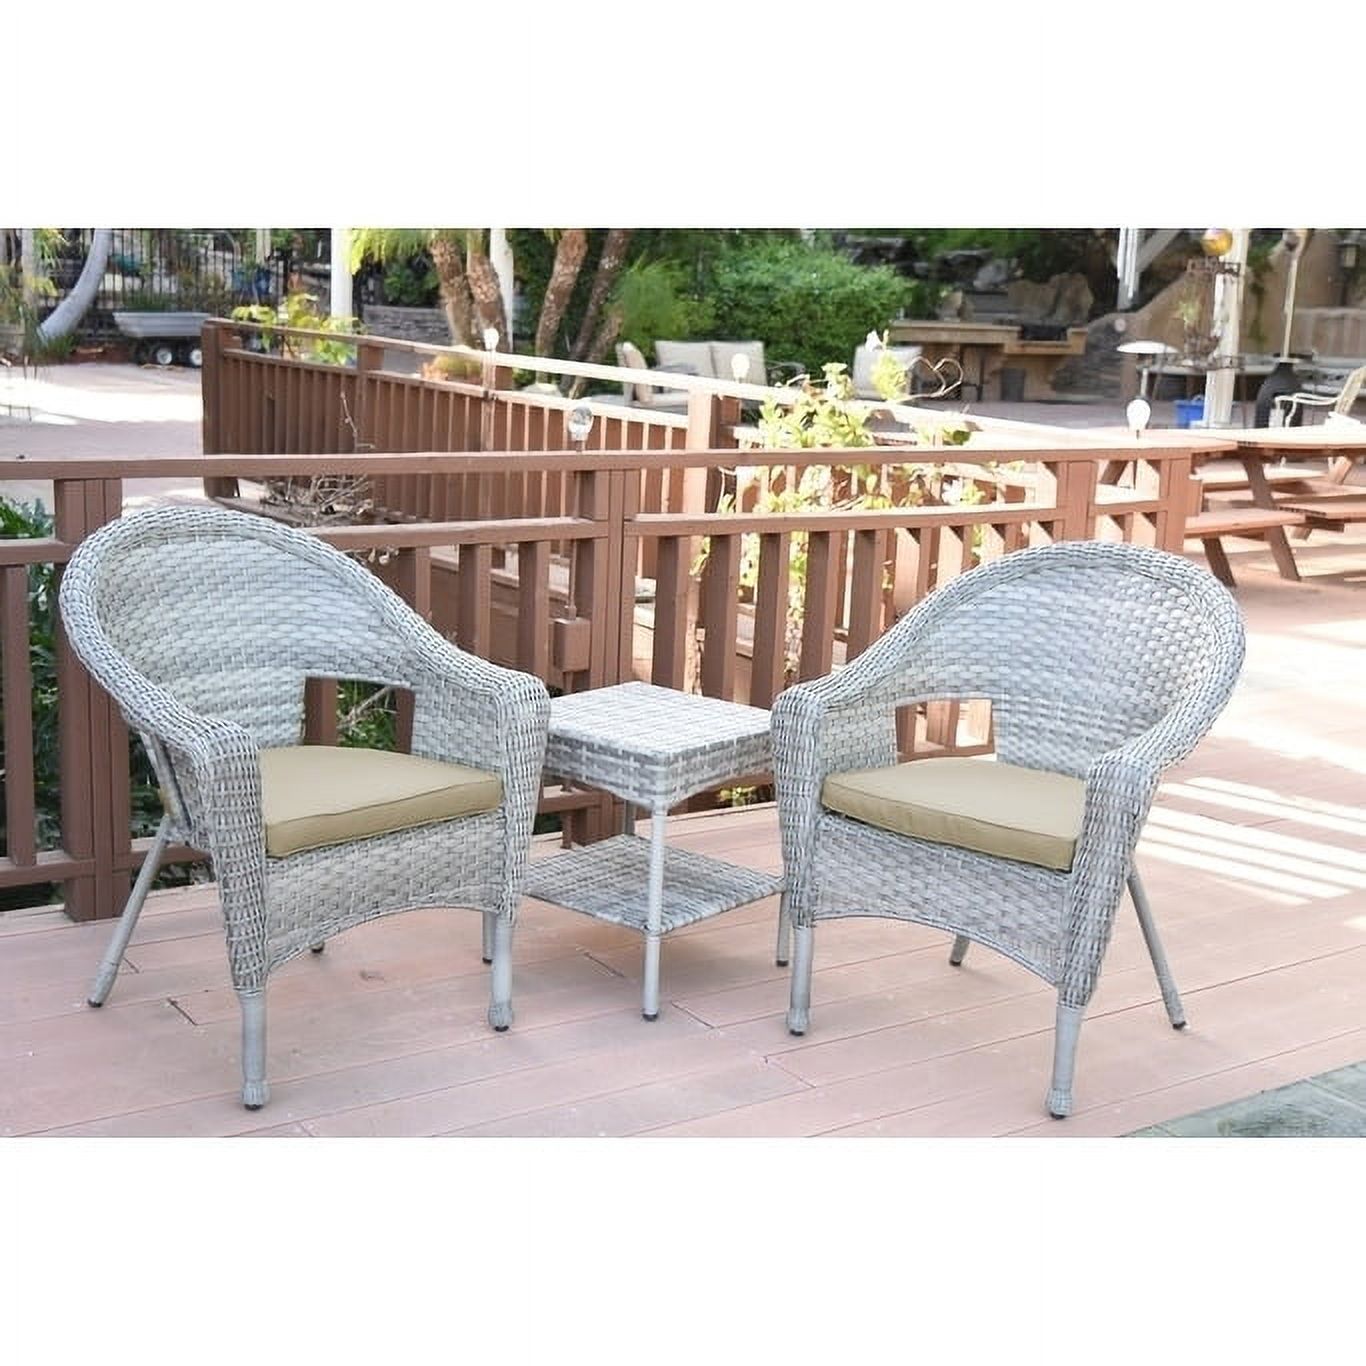 Jeco Clark 3 Piece Wicker Patio Conversation Set in Gray and Green - image 2 of 2